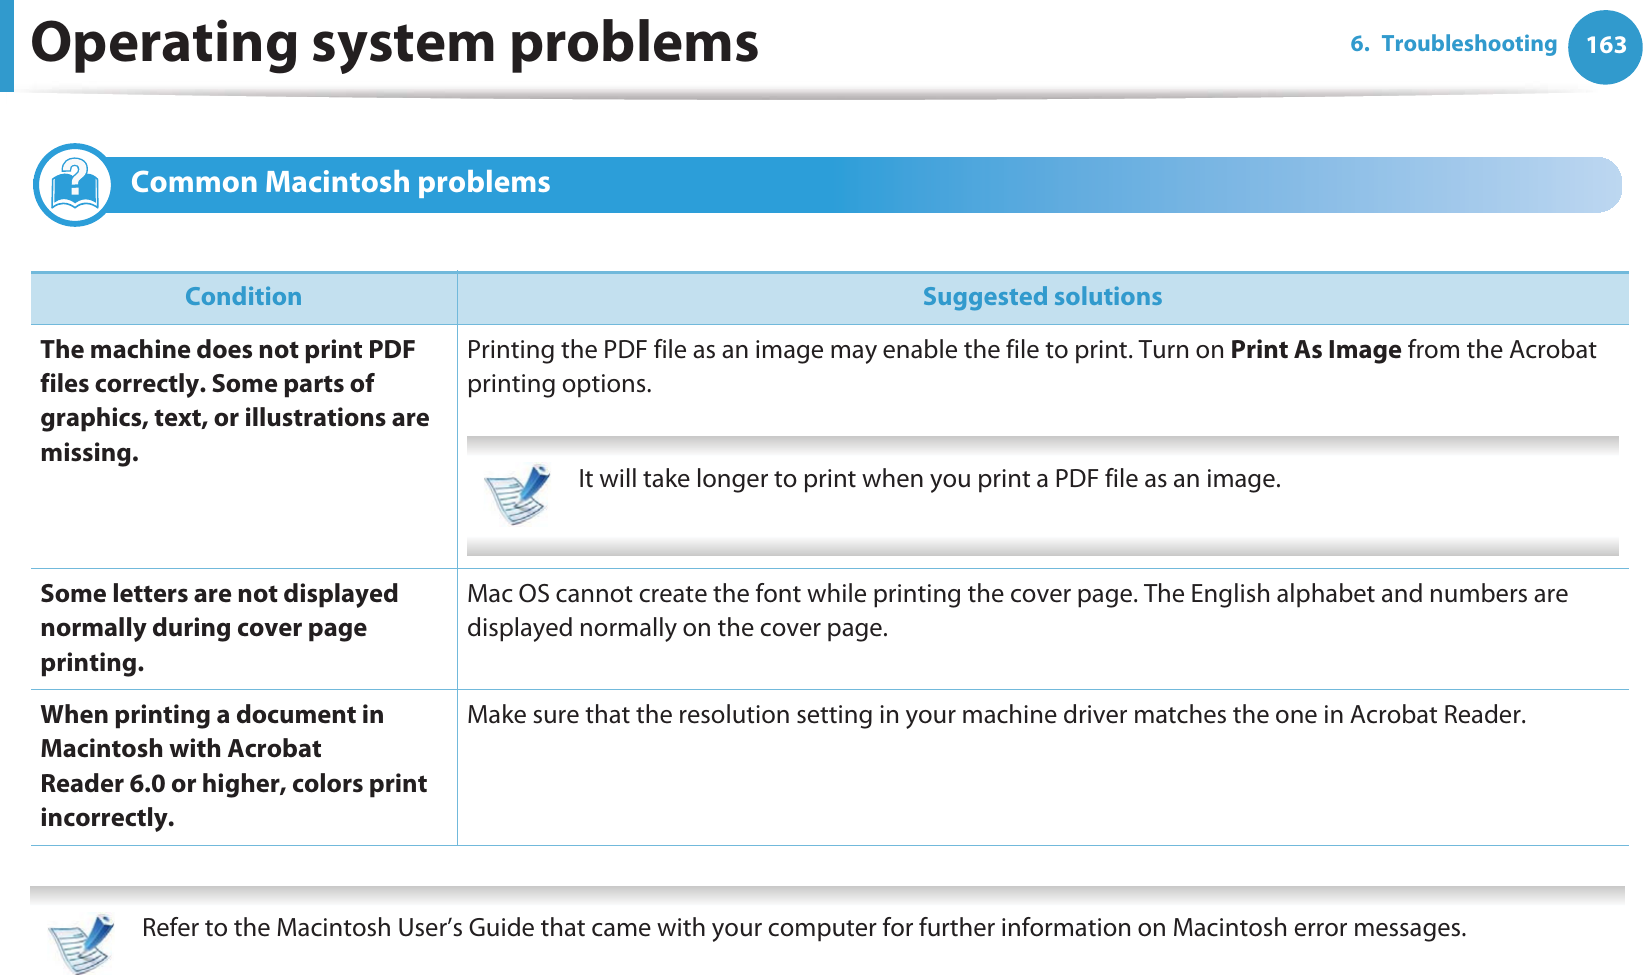 Operating system problems 1636. Troubleshooting2 Common Macintosh problems   Refer to the Macintosh User’s Guide that came with your computer for further information on Macintosh error messages. Condition Suggested solutionsThe machine does not print PDF files correctly. Some parts of graphics, text, or illustrations are missing.Printing the PDF file as an image may enable the file to print. Turn on Print As Image from the Acrobat printing options.  It will take longer to print when you print a PDF file as an image. Some letters are not displayed normally during cover page printing.Mac OS cannot create the font while printing the cover page. The English alphabet and numbers are displayed normally on the cover page.When printing a document in Macintosh with Acrobat Reader 6.0 or higher, colors print incorrectly.Make sure that the resolution setting in your machine driver matches the one in Acrobat Reader.